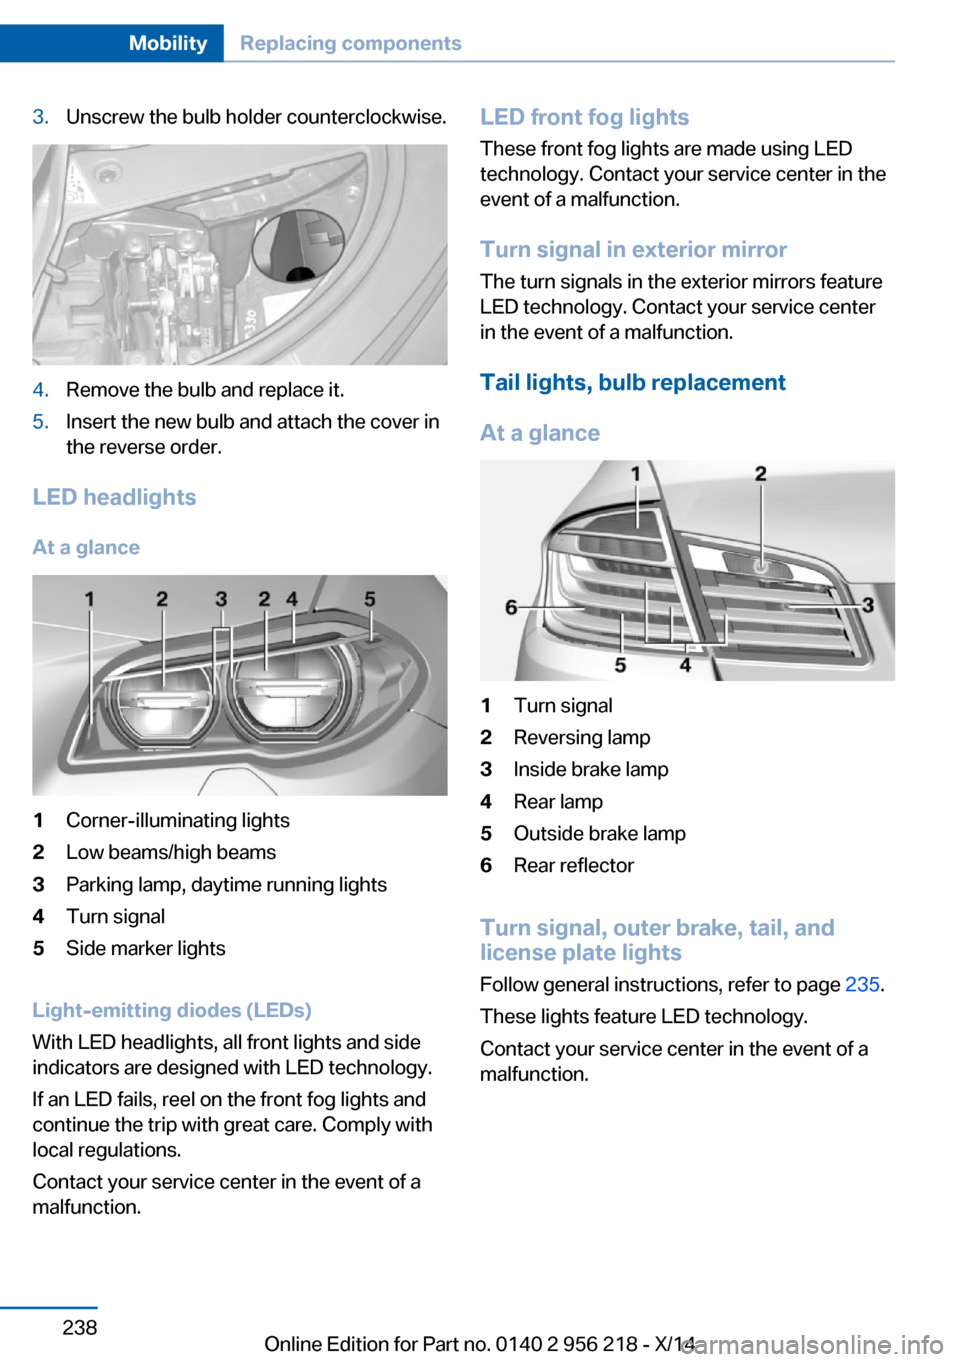 BMW 5 SERIES 2014 F10 Owners Guide 3.Unscrew the bulb holder counterclockwise.4.Remove the bulb and replace it.5.Insert the new bulb and attach the cover in
the reverse order.
LED headlights
At a glance
1Corner-illuminating lights2Low 